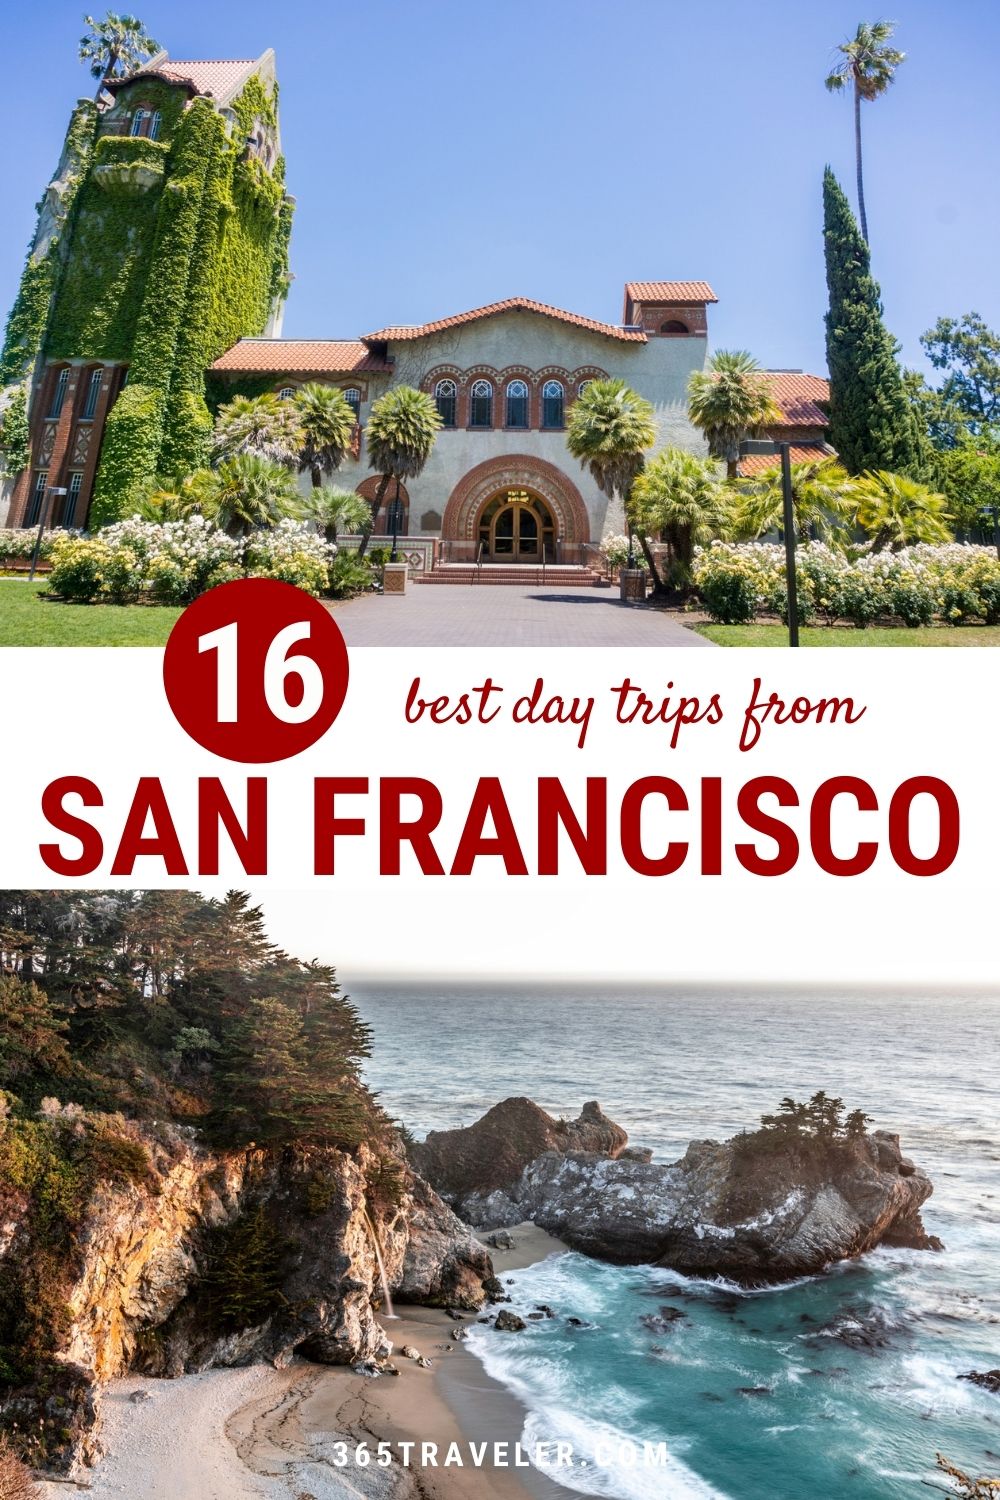 16 ABSOLUTE BEST DAY TRIPS FROM SAN FRANCISCO